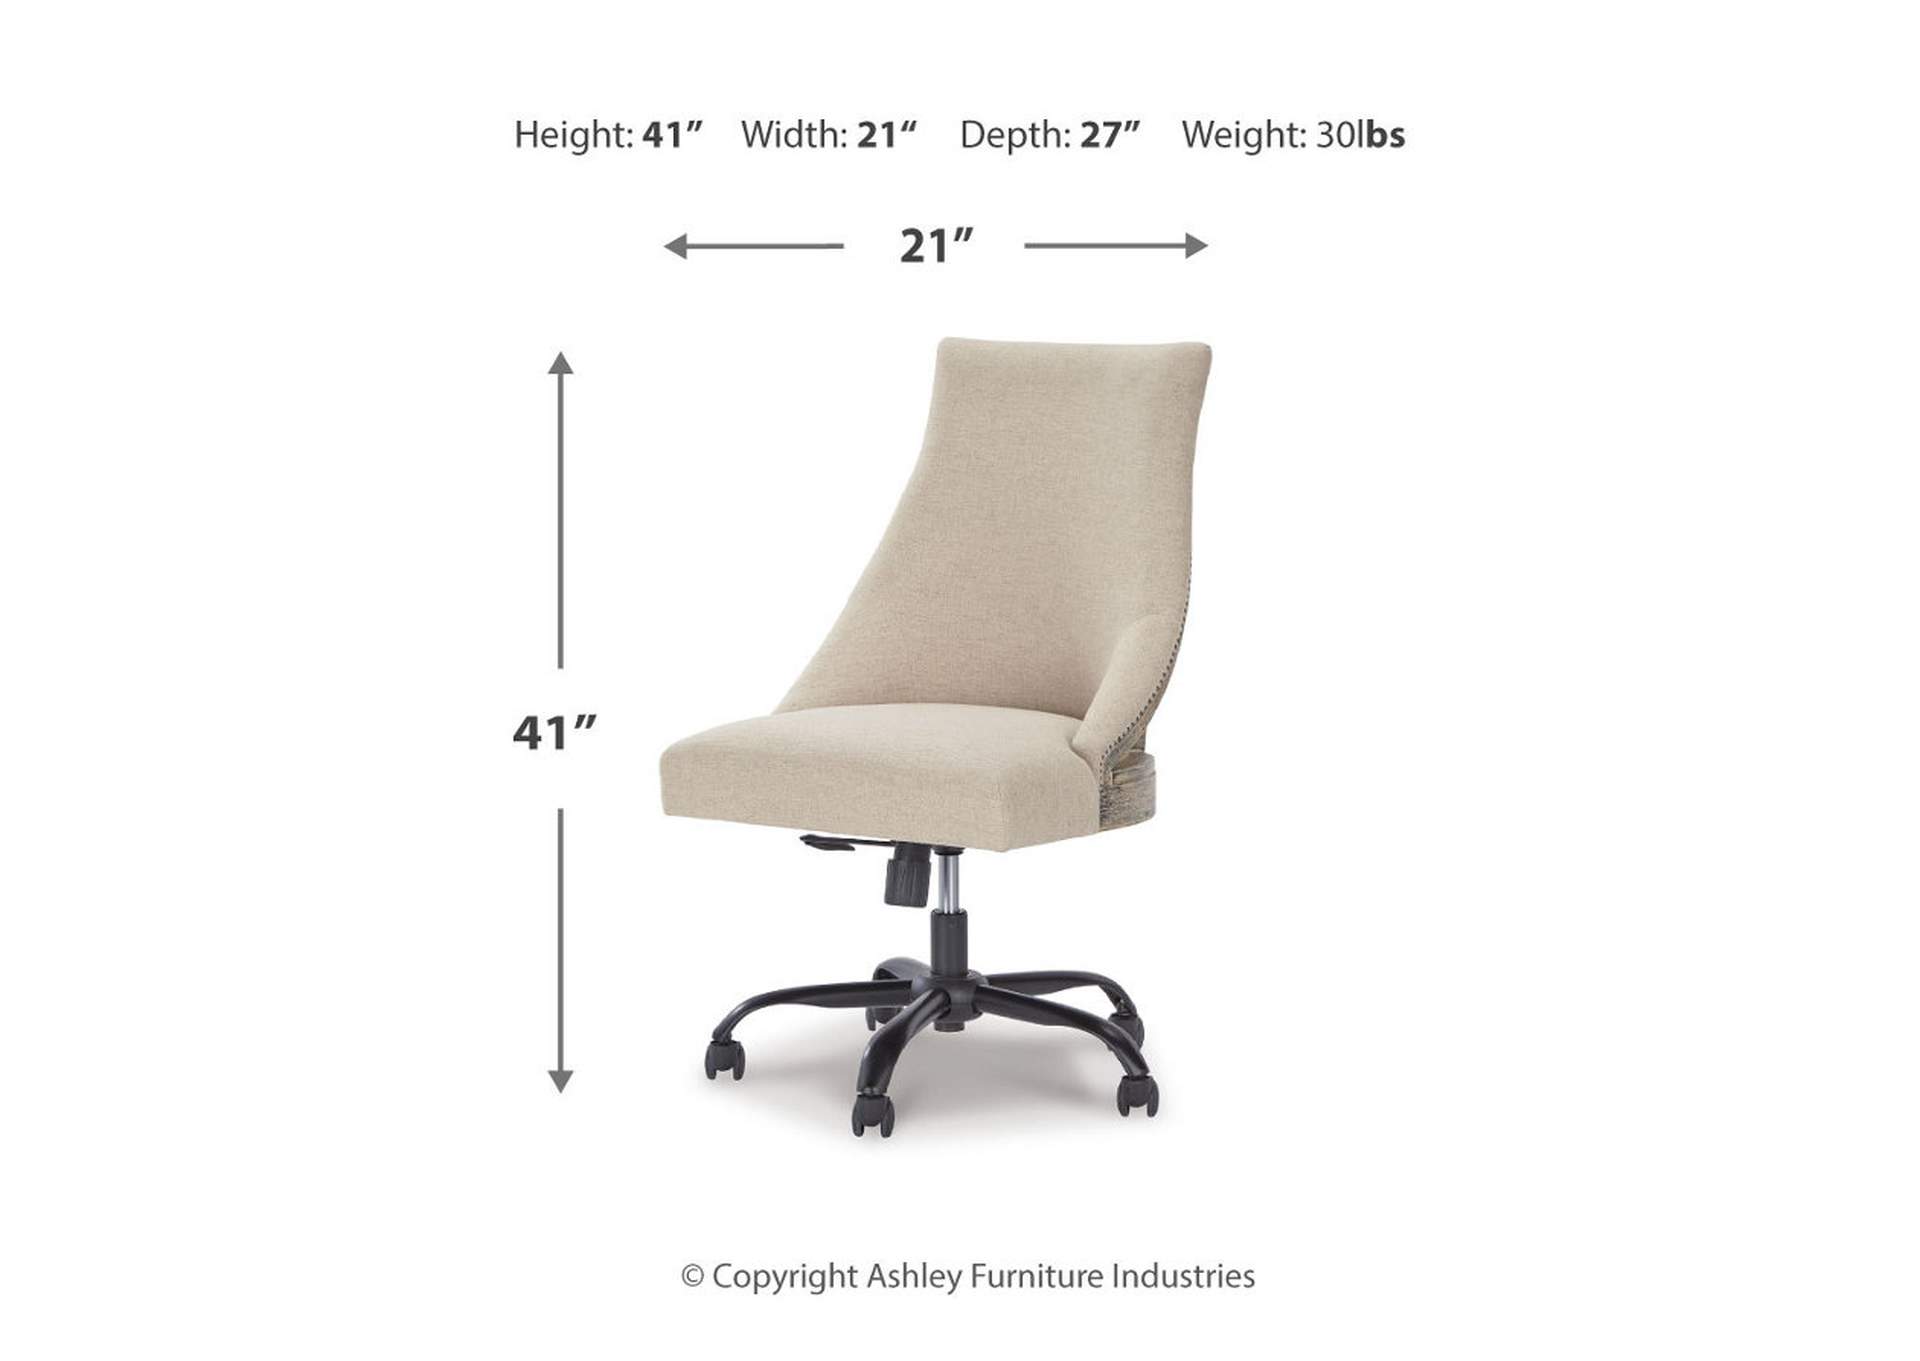 Office Chair Program Home Office Desk Chair,Signature Design By Ashley